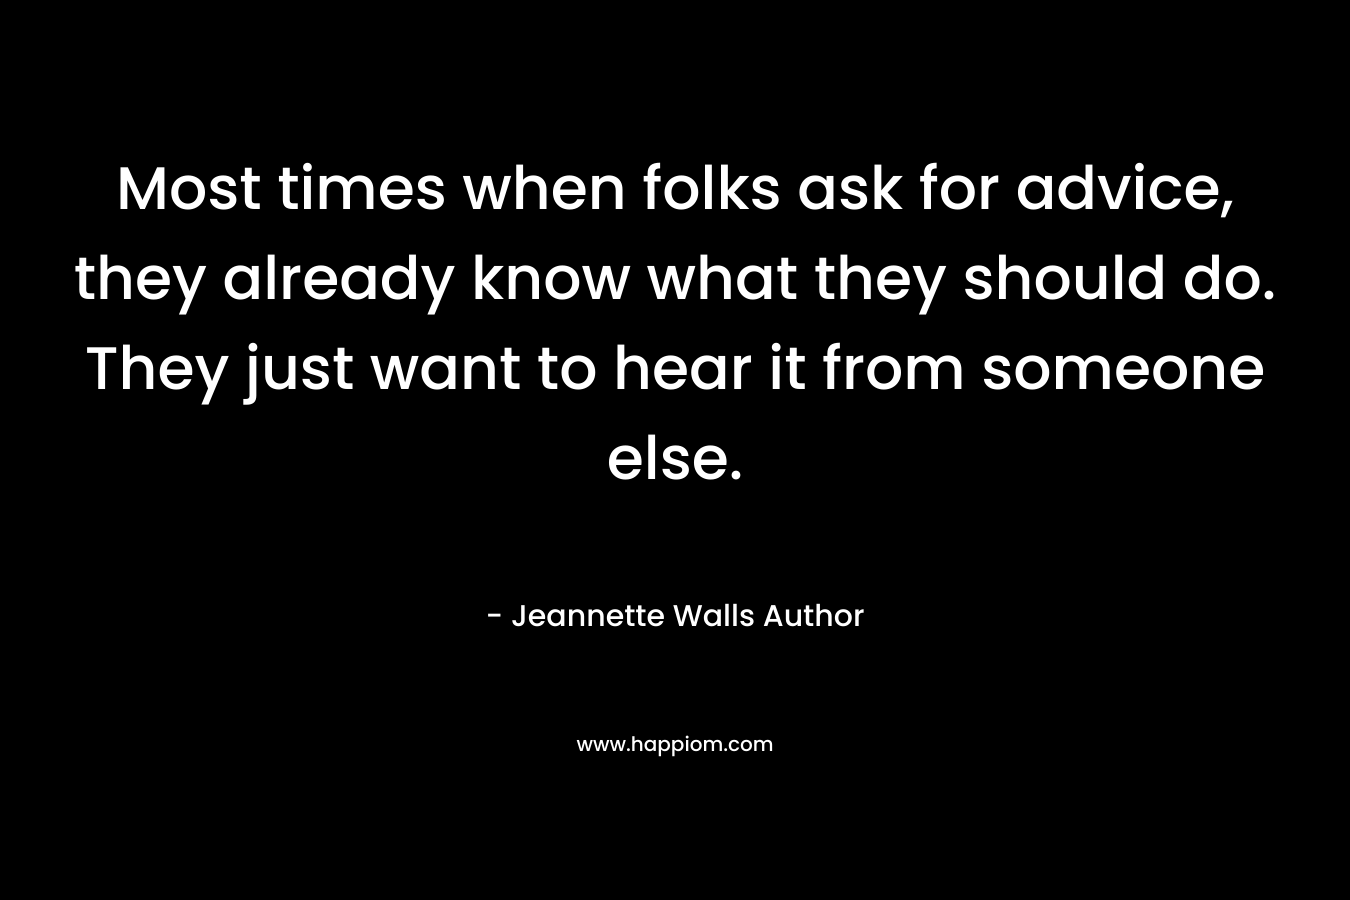 Most times when folks ask for advice, they already know what they should do. They just want to hear it from someone else.